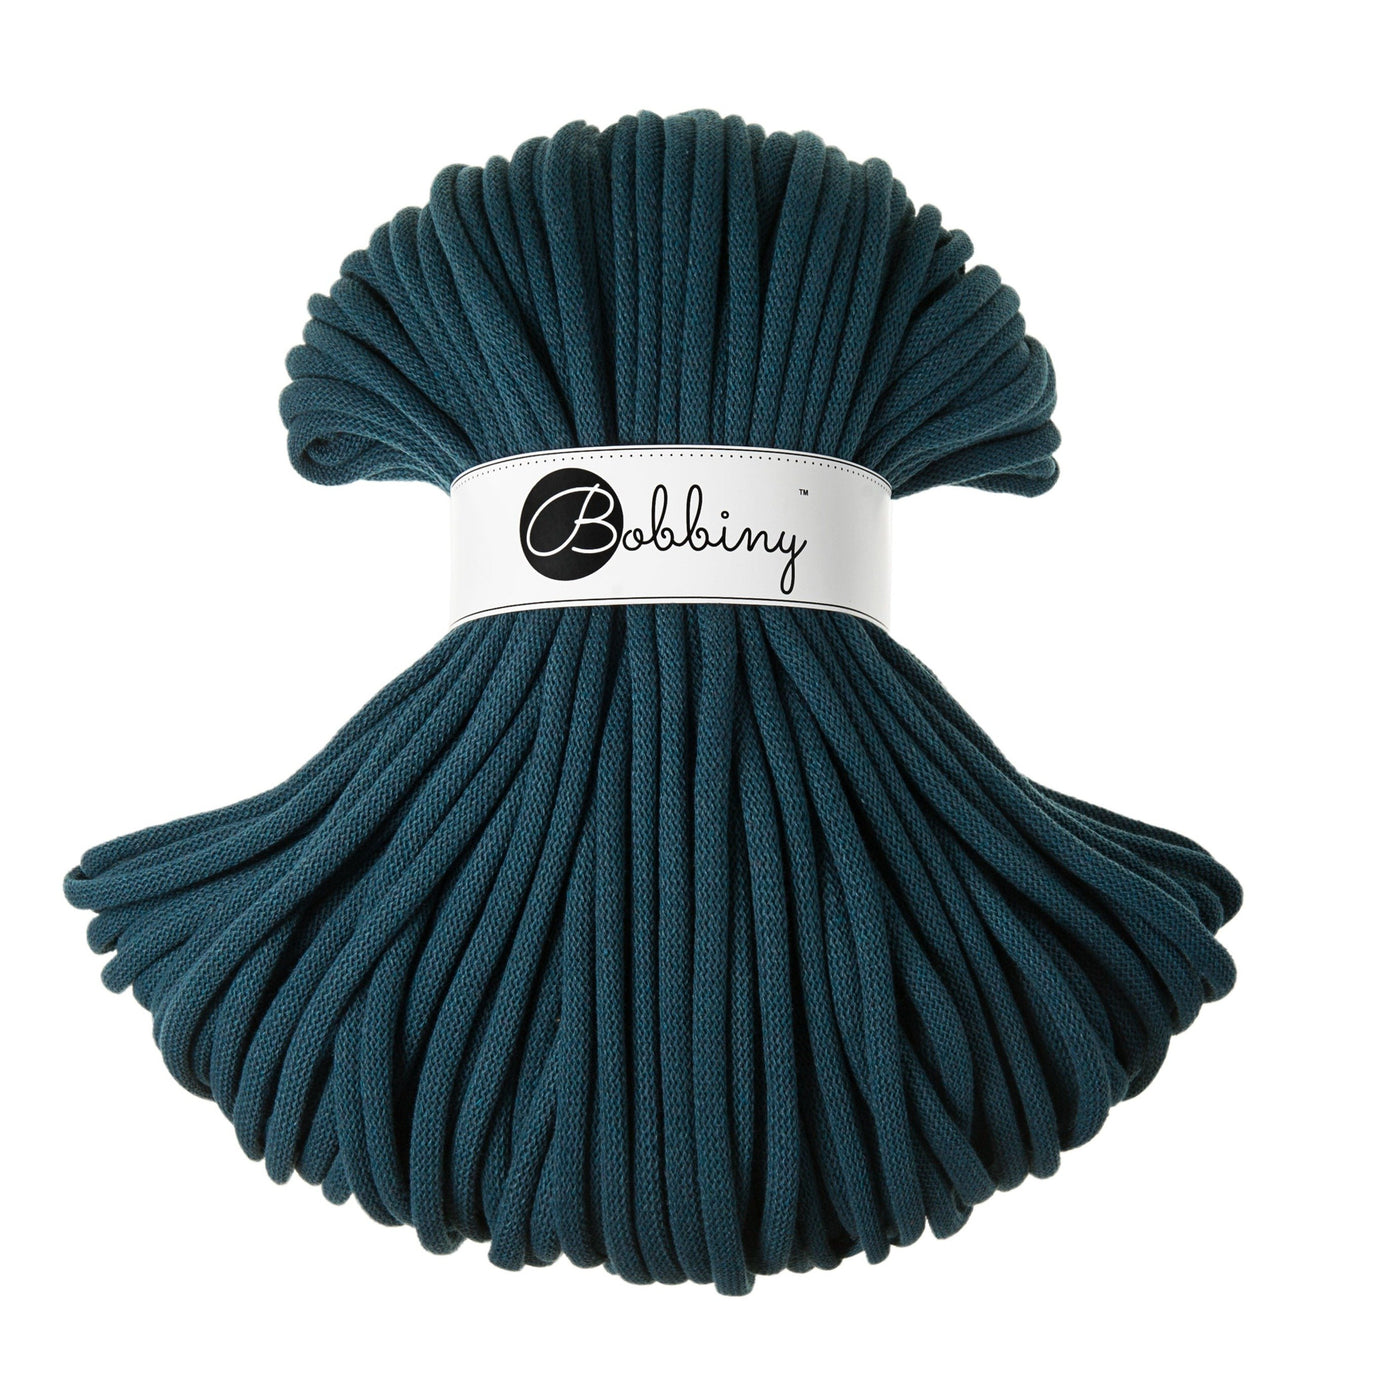 Where can I find Bobbiny Braided Cords Bobbiny Jumbo 9mm - 100m Peacock Blue? These gorgeous Bobbiny Ropes are made in Poland from 100% recycled cottons and are non toxic and certified safe for children.  9mm Diameter  Length 100m Recommended for use with 14-16mm crochet hooks or knitting needles.  Perfect for use with Macrame, Crochet or Knitting.